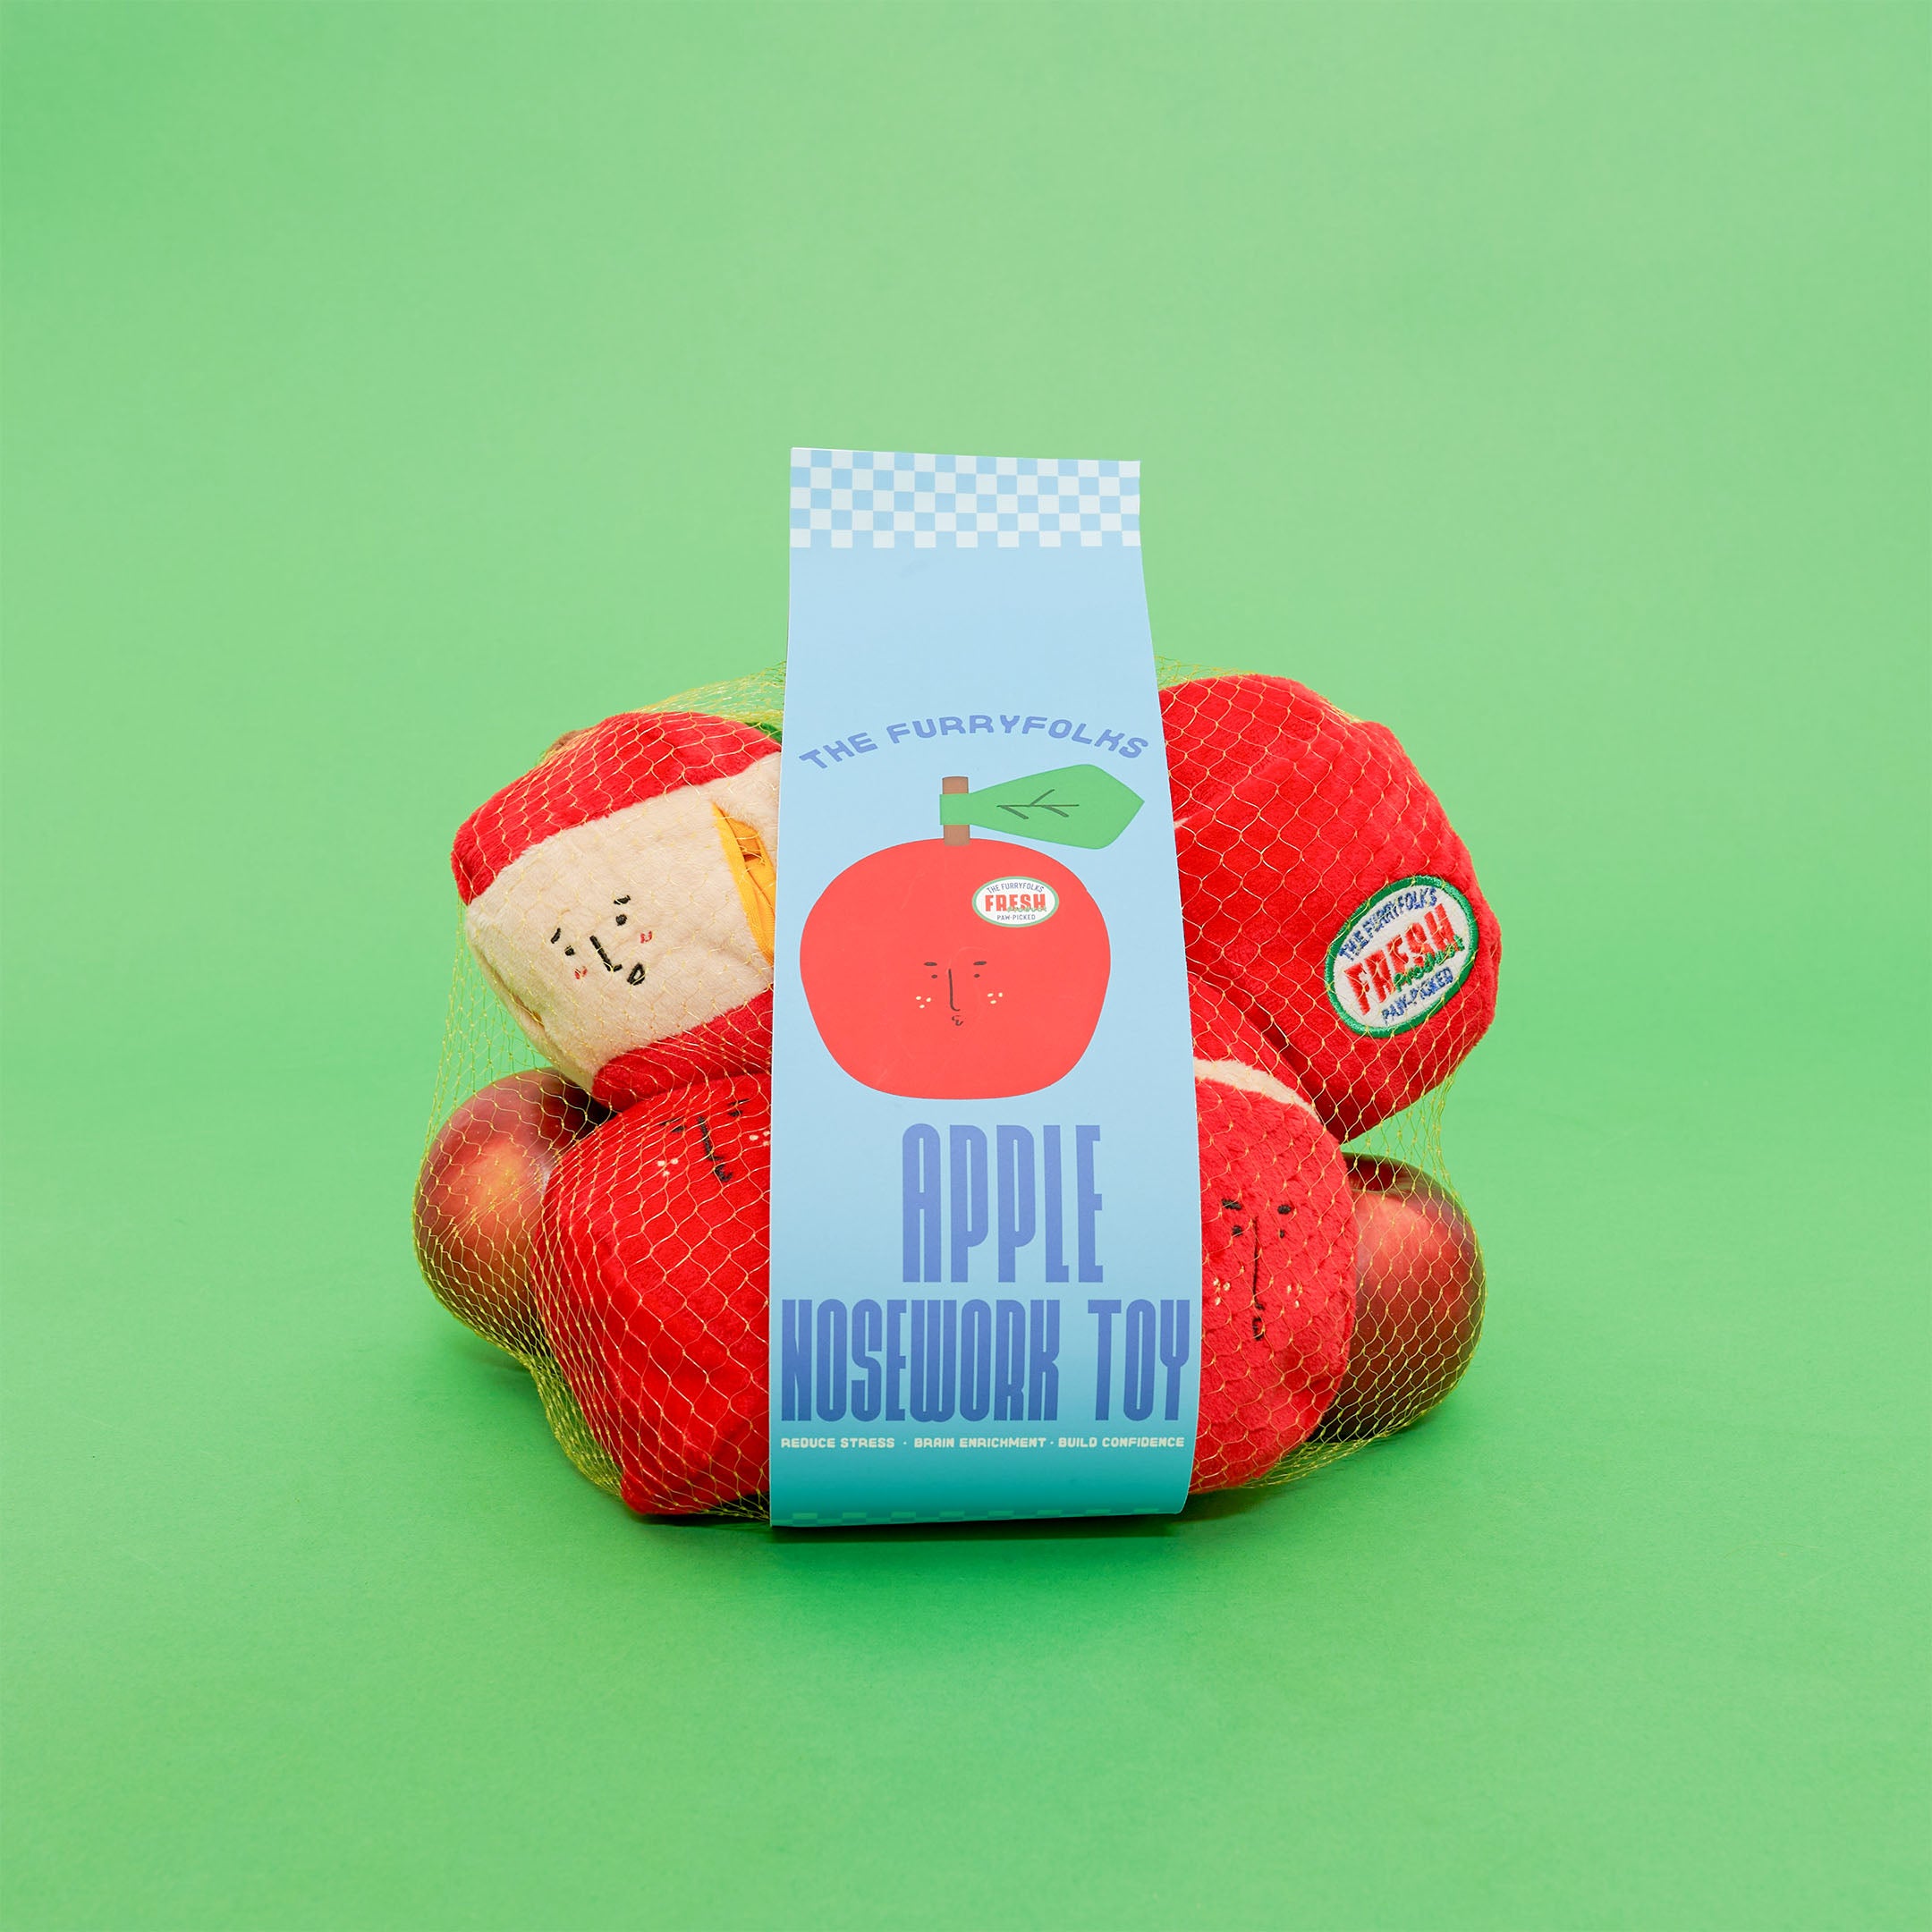  A mesh bag of red apple-shaped dog toys with a label reading "The Furryfolks Apple Nosework Toy" against a green background.